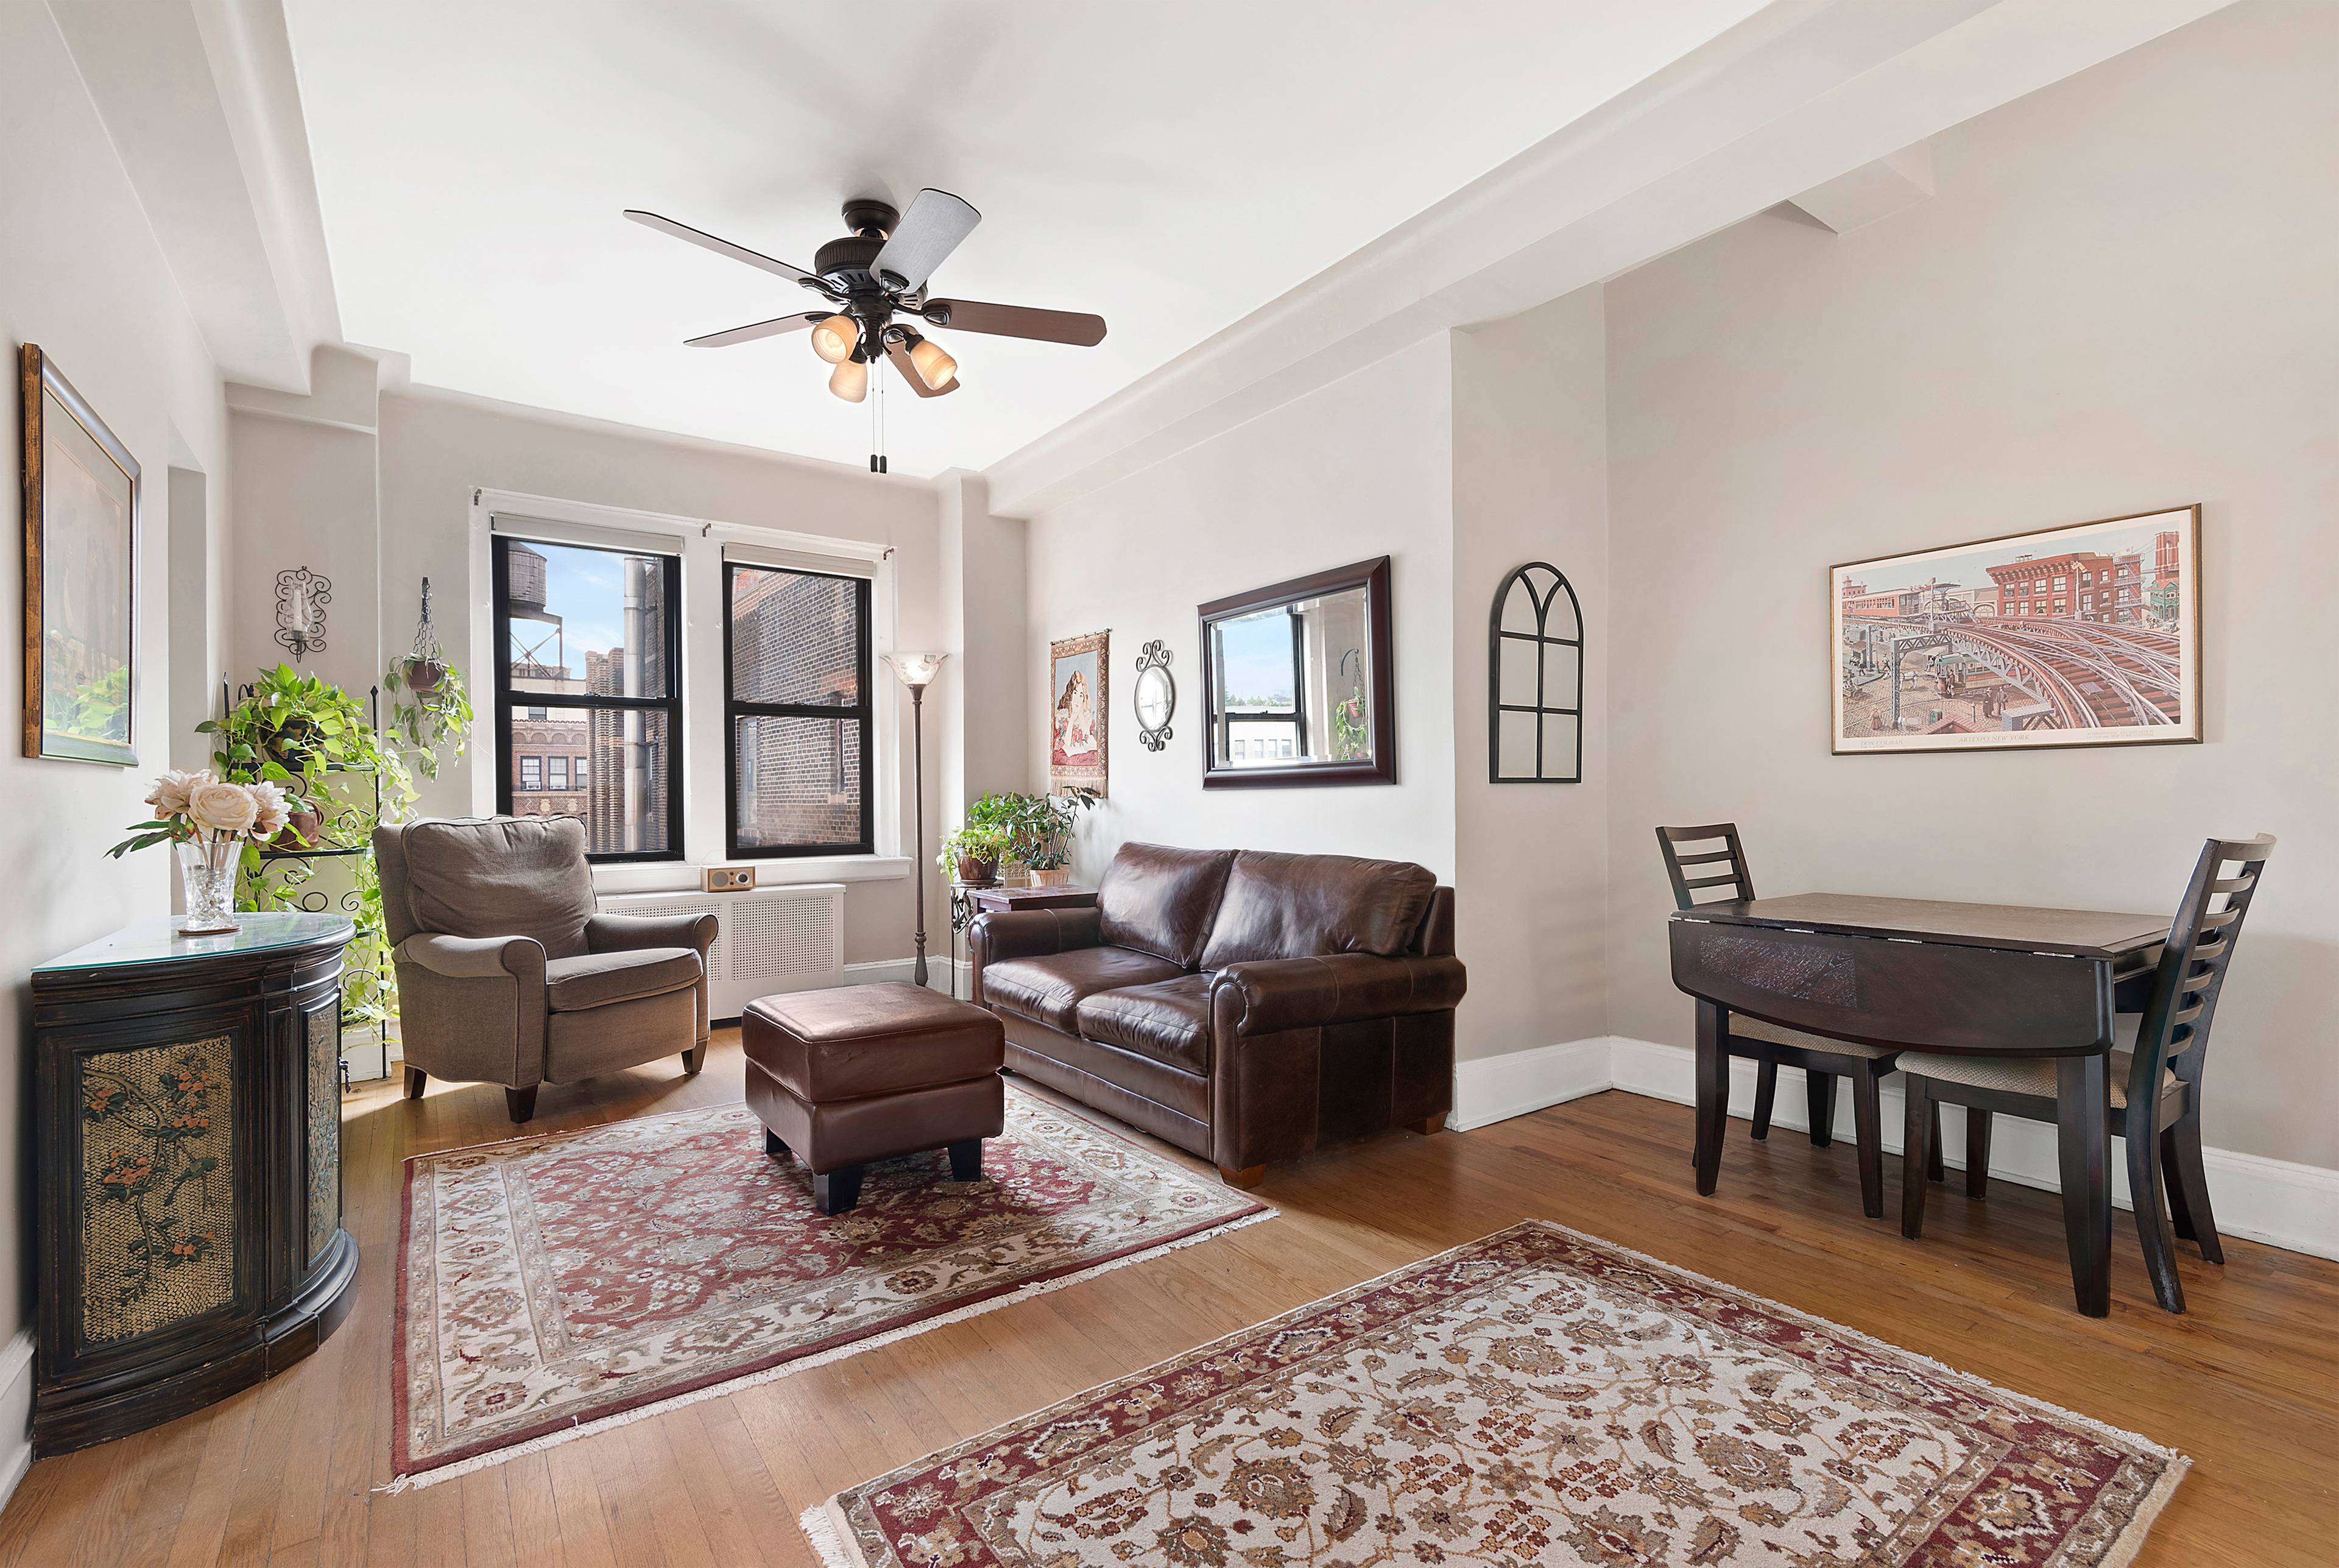 Enjoy an authentic Upper West Side lifestyle surrounded by pre war charm in this spacious alcove studio.